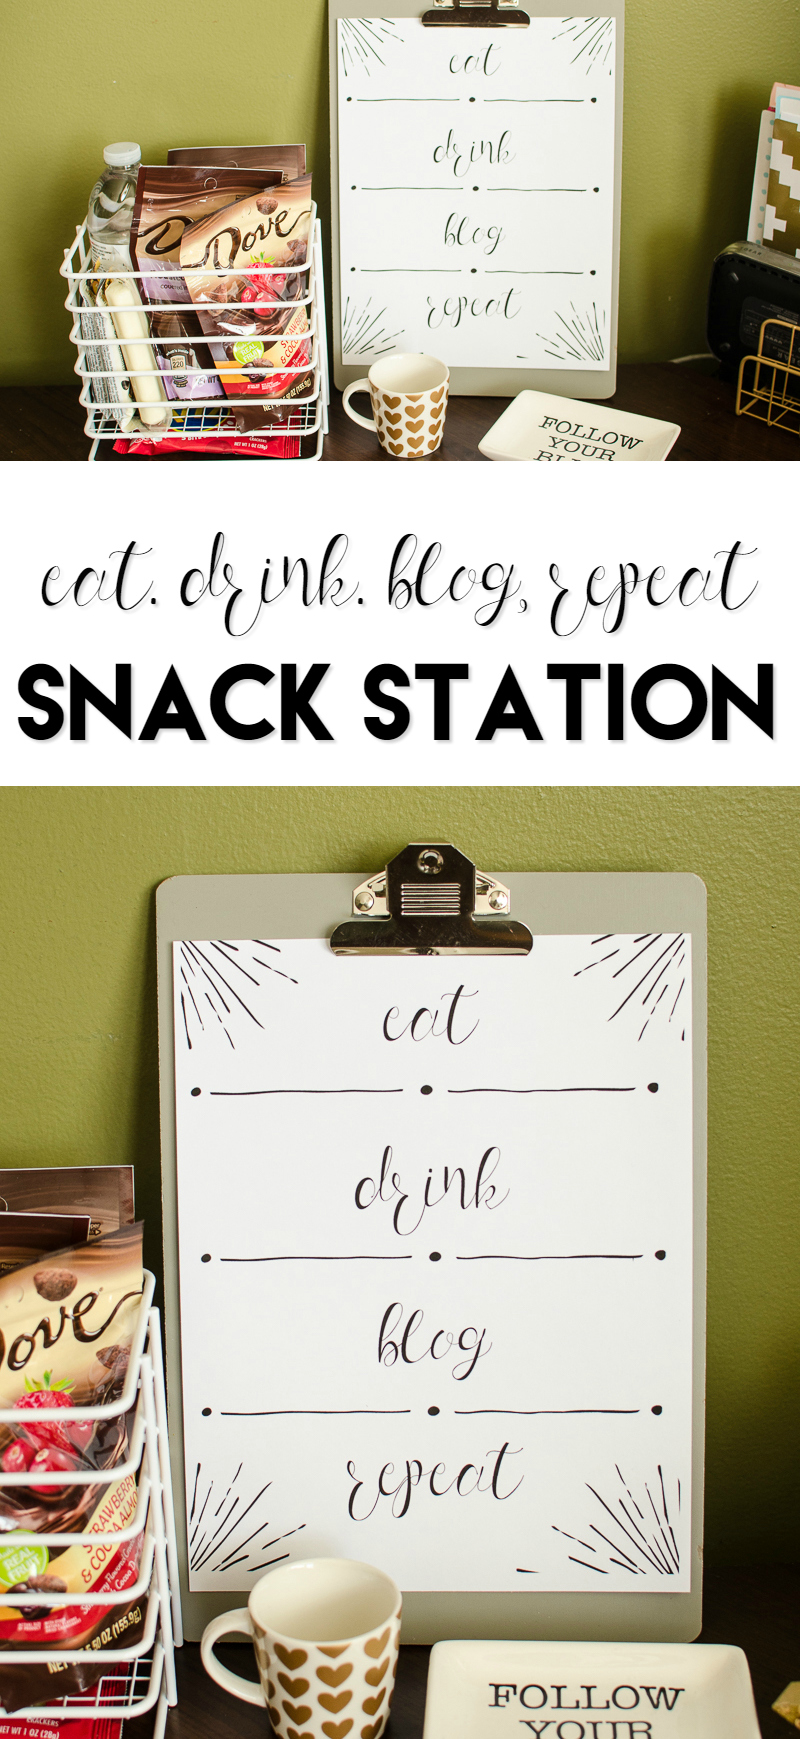 eat drink blog repeat snack station